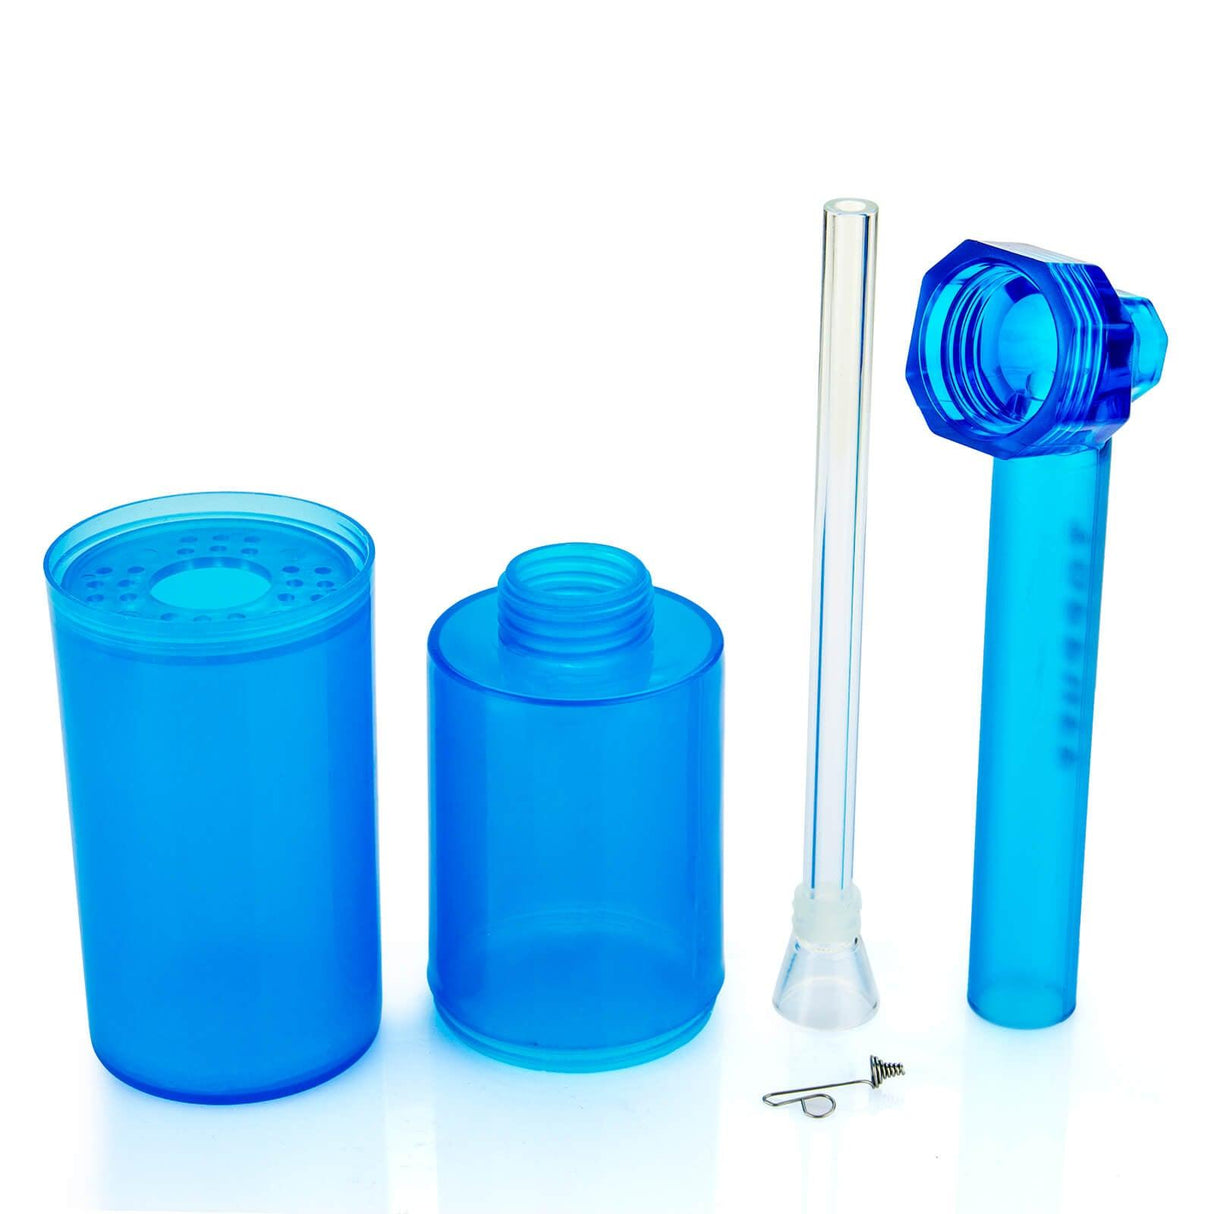 PILOT DIARY Portable Toppuff Water Bottle Pipe Kit in Blue - Front View with Components